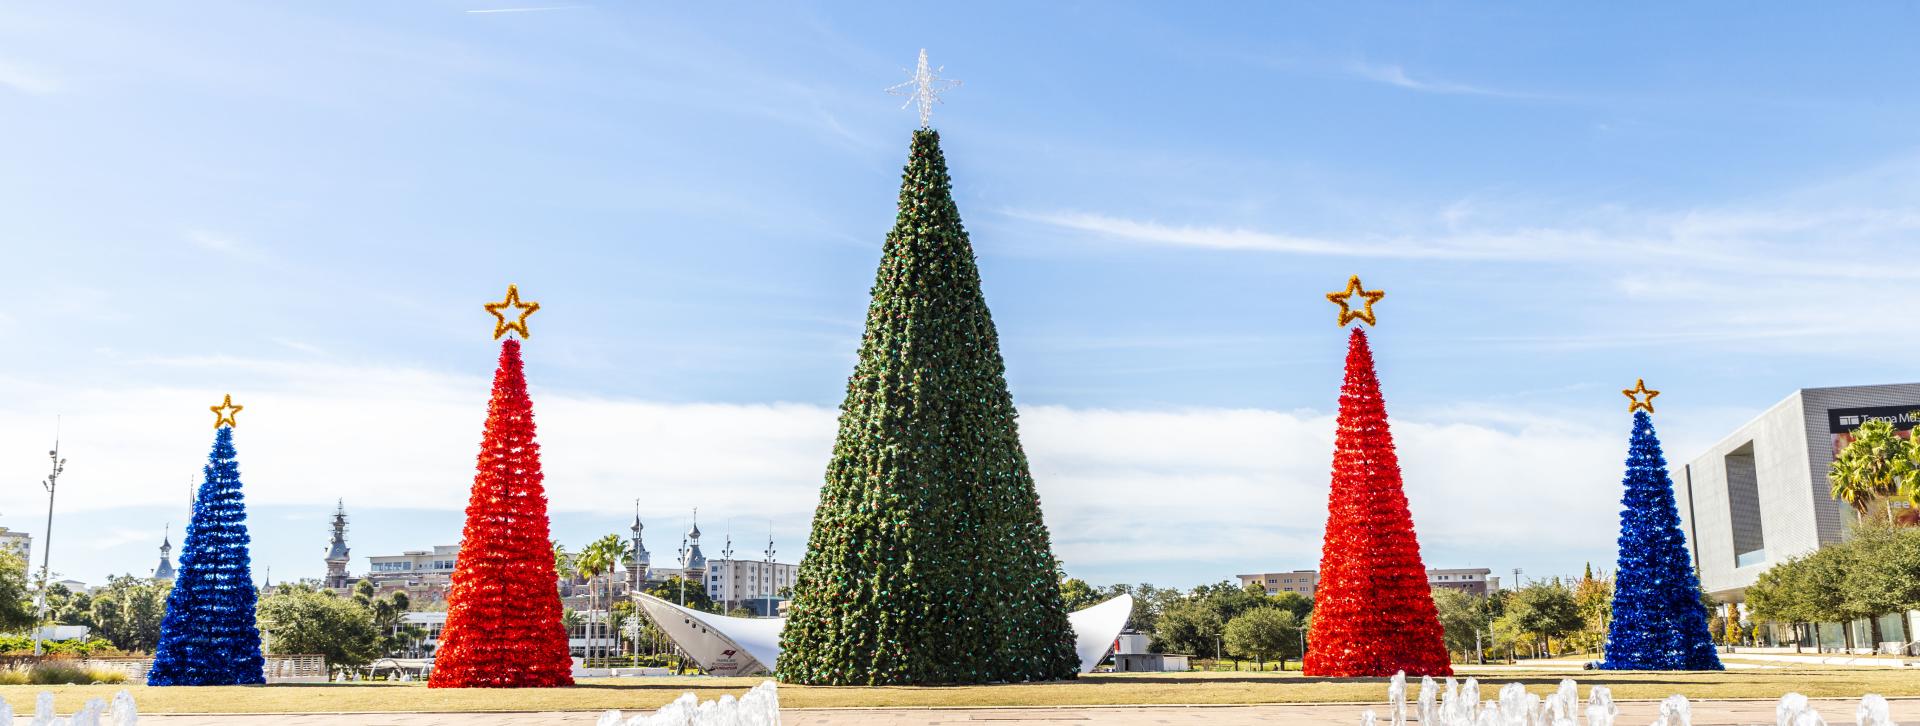 Tampa featured Christmas